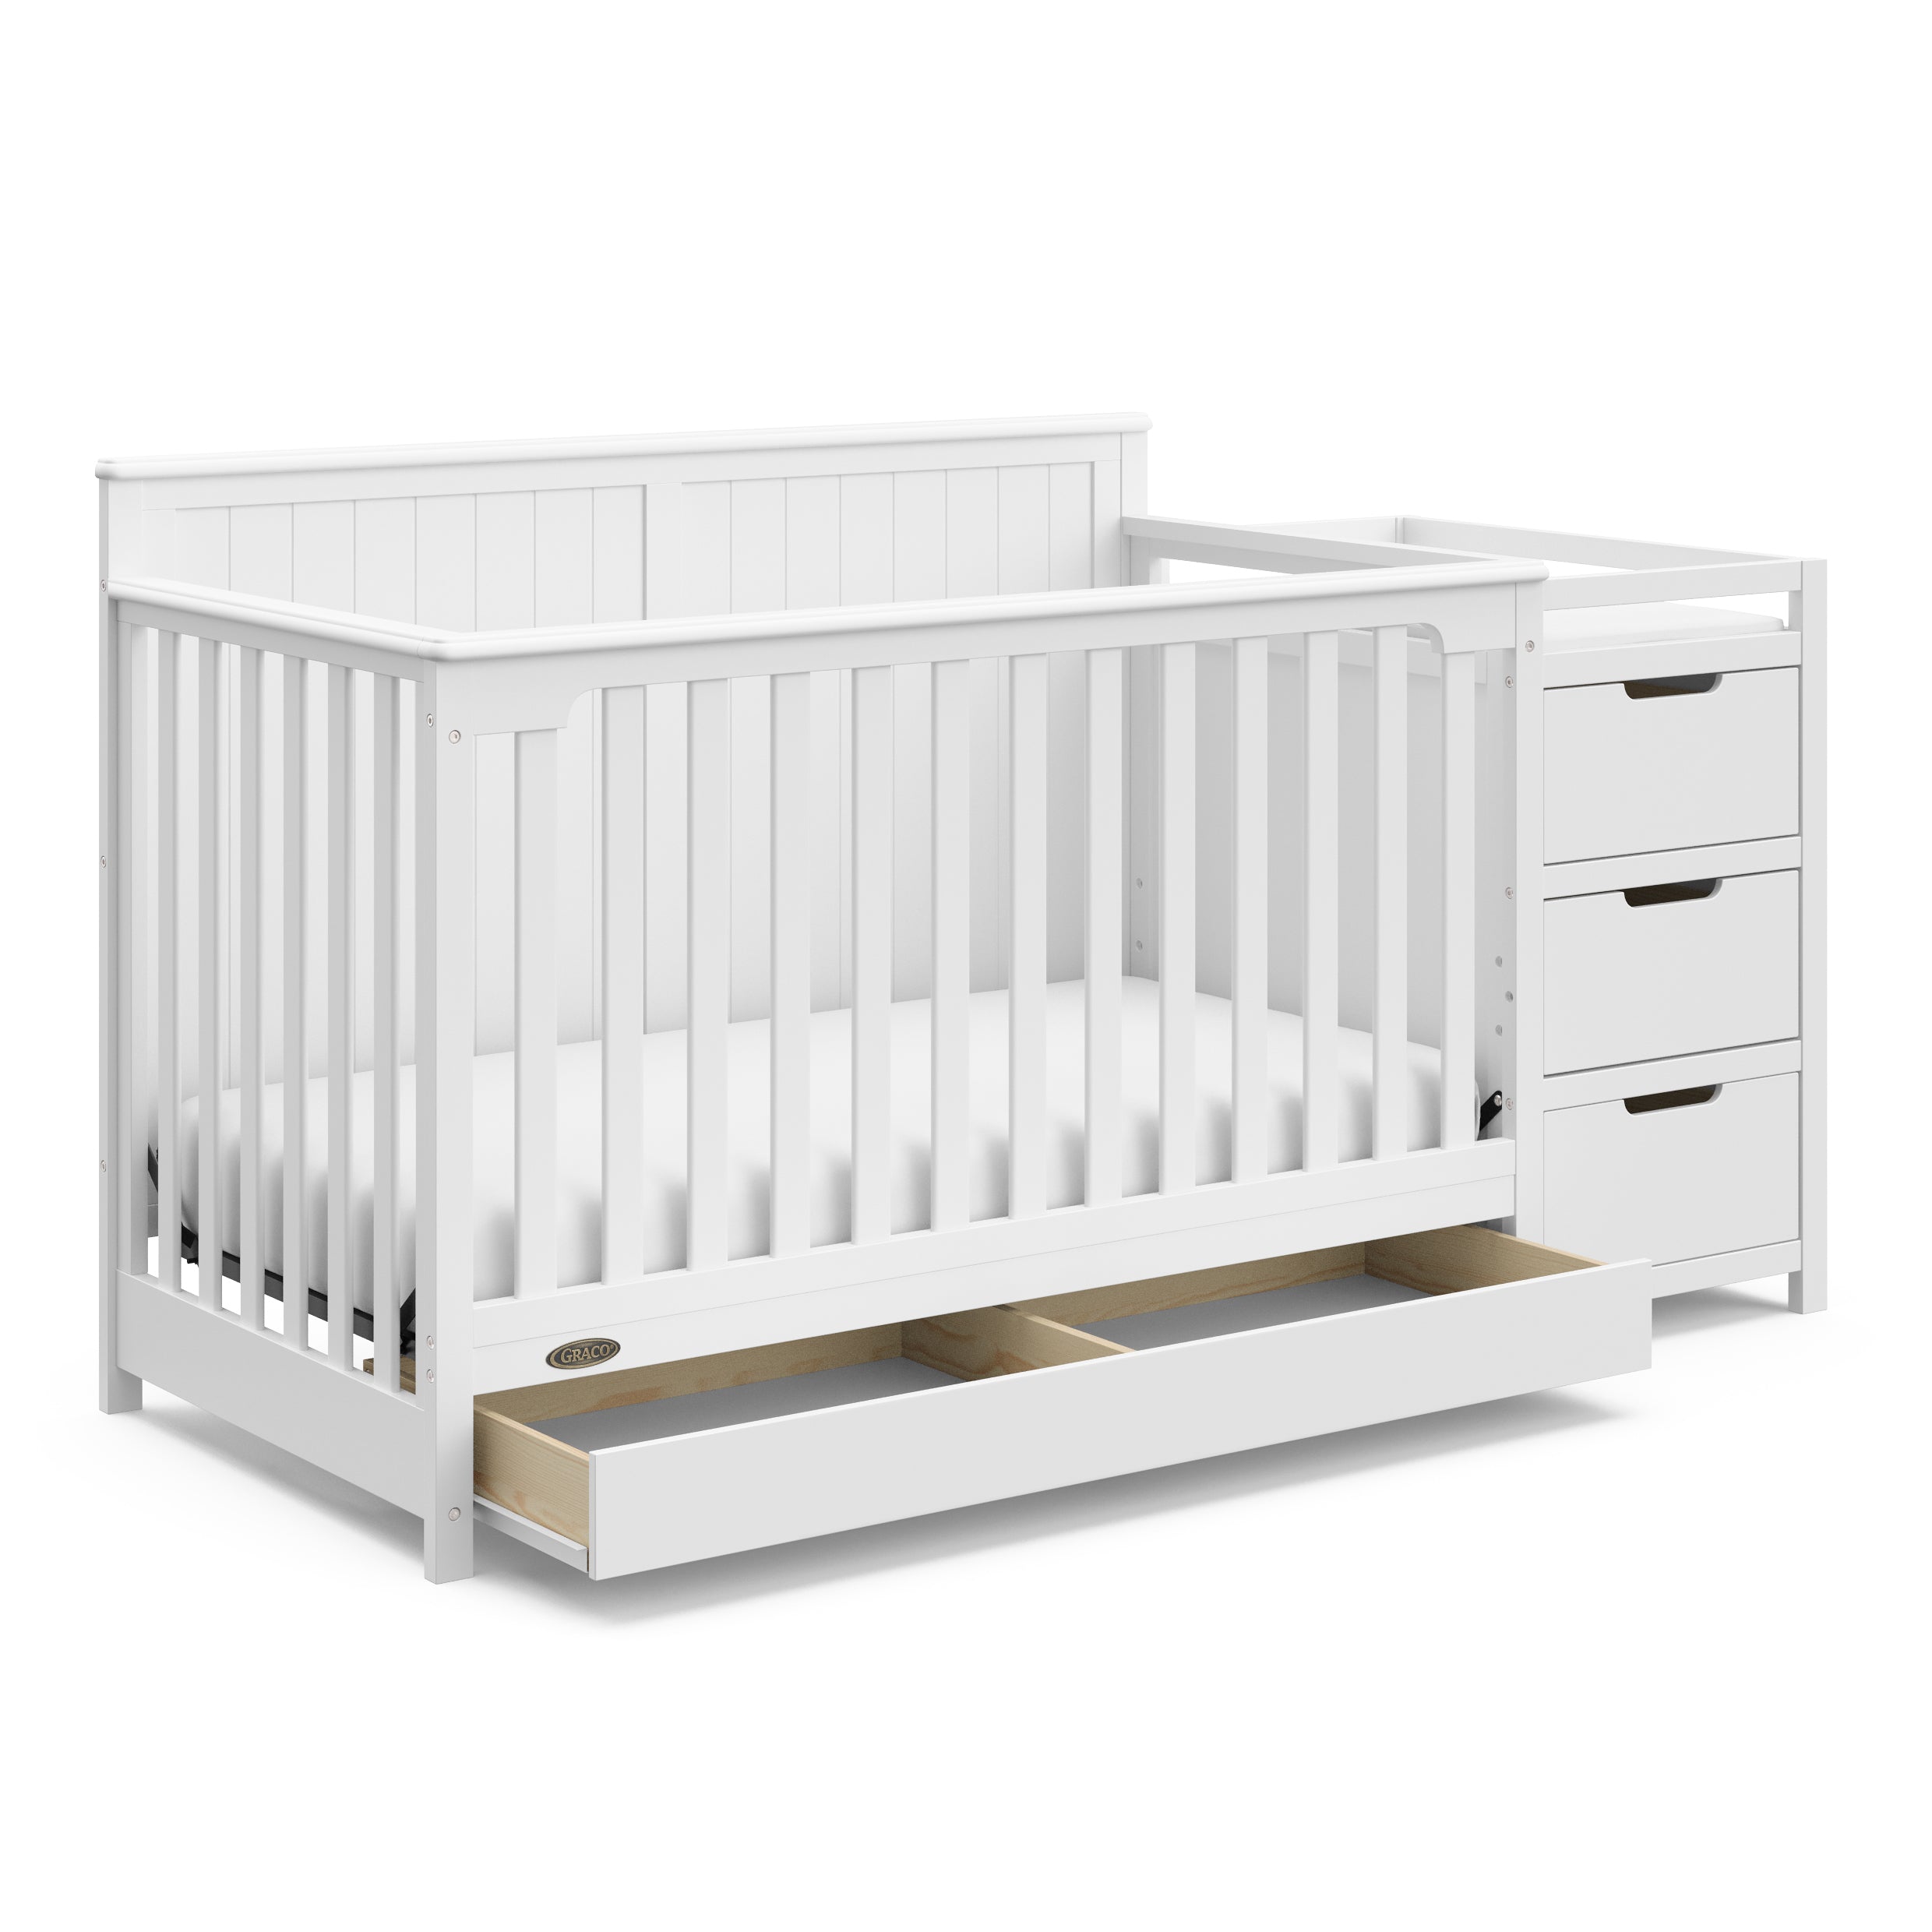 Graco Hadley 4-in-1 Convertible Crib and Changer with Drawer, White *AS-IS*